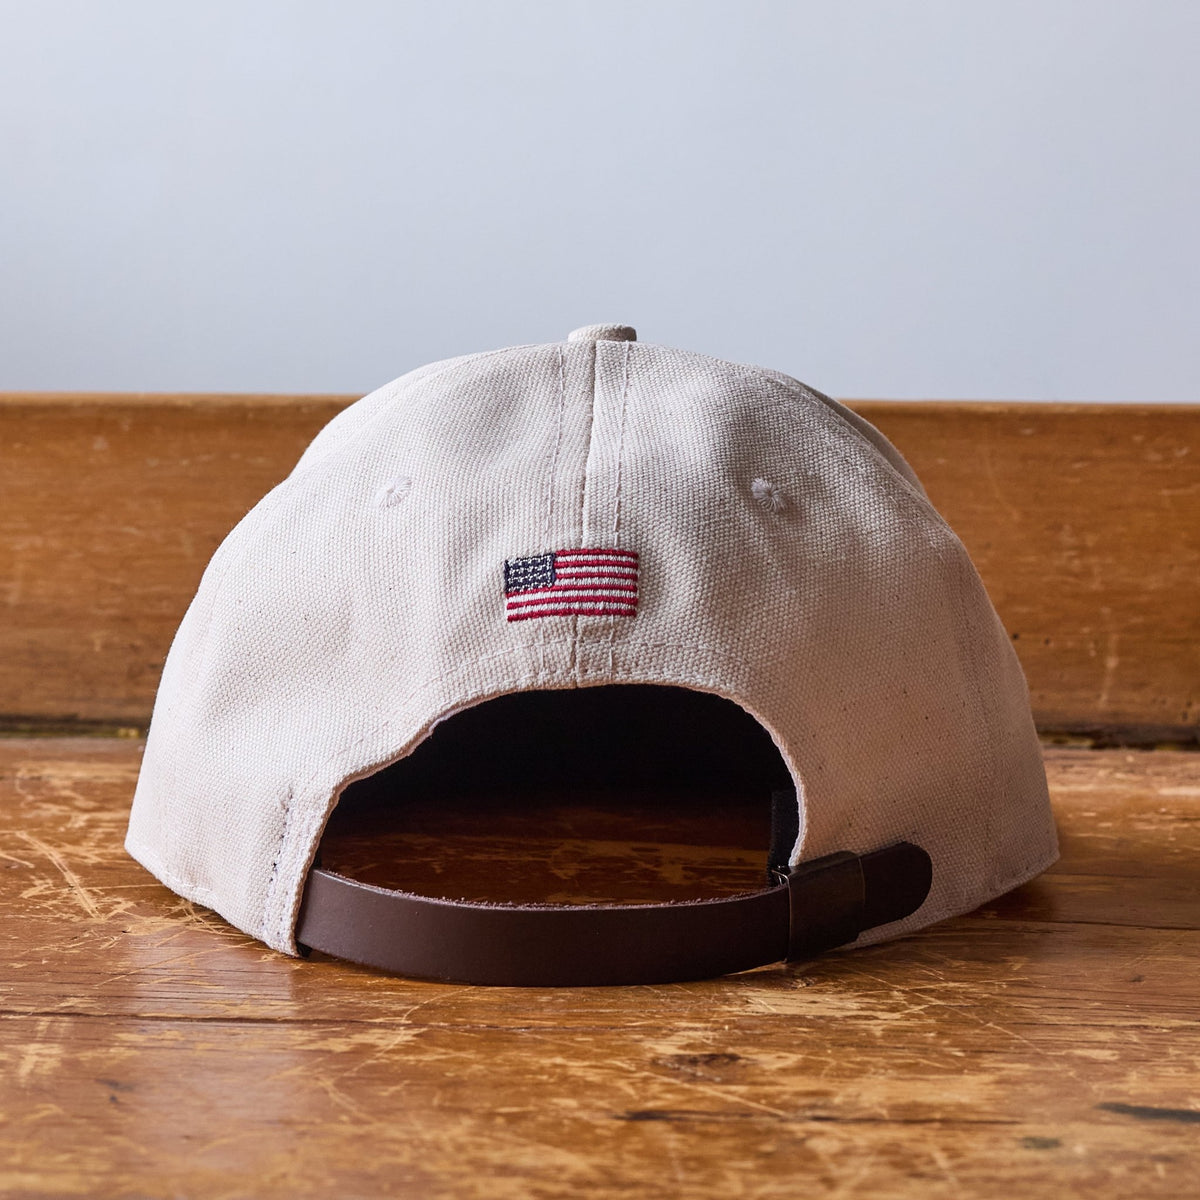 GS x Ebbets Field Flannels Cotton Canvas Hat: Natural / Red Logo - grown&amp;sewn